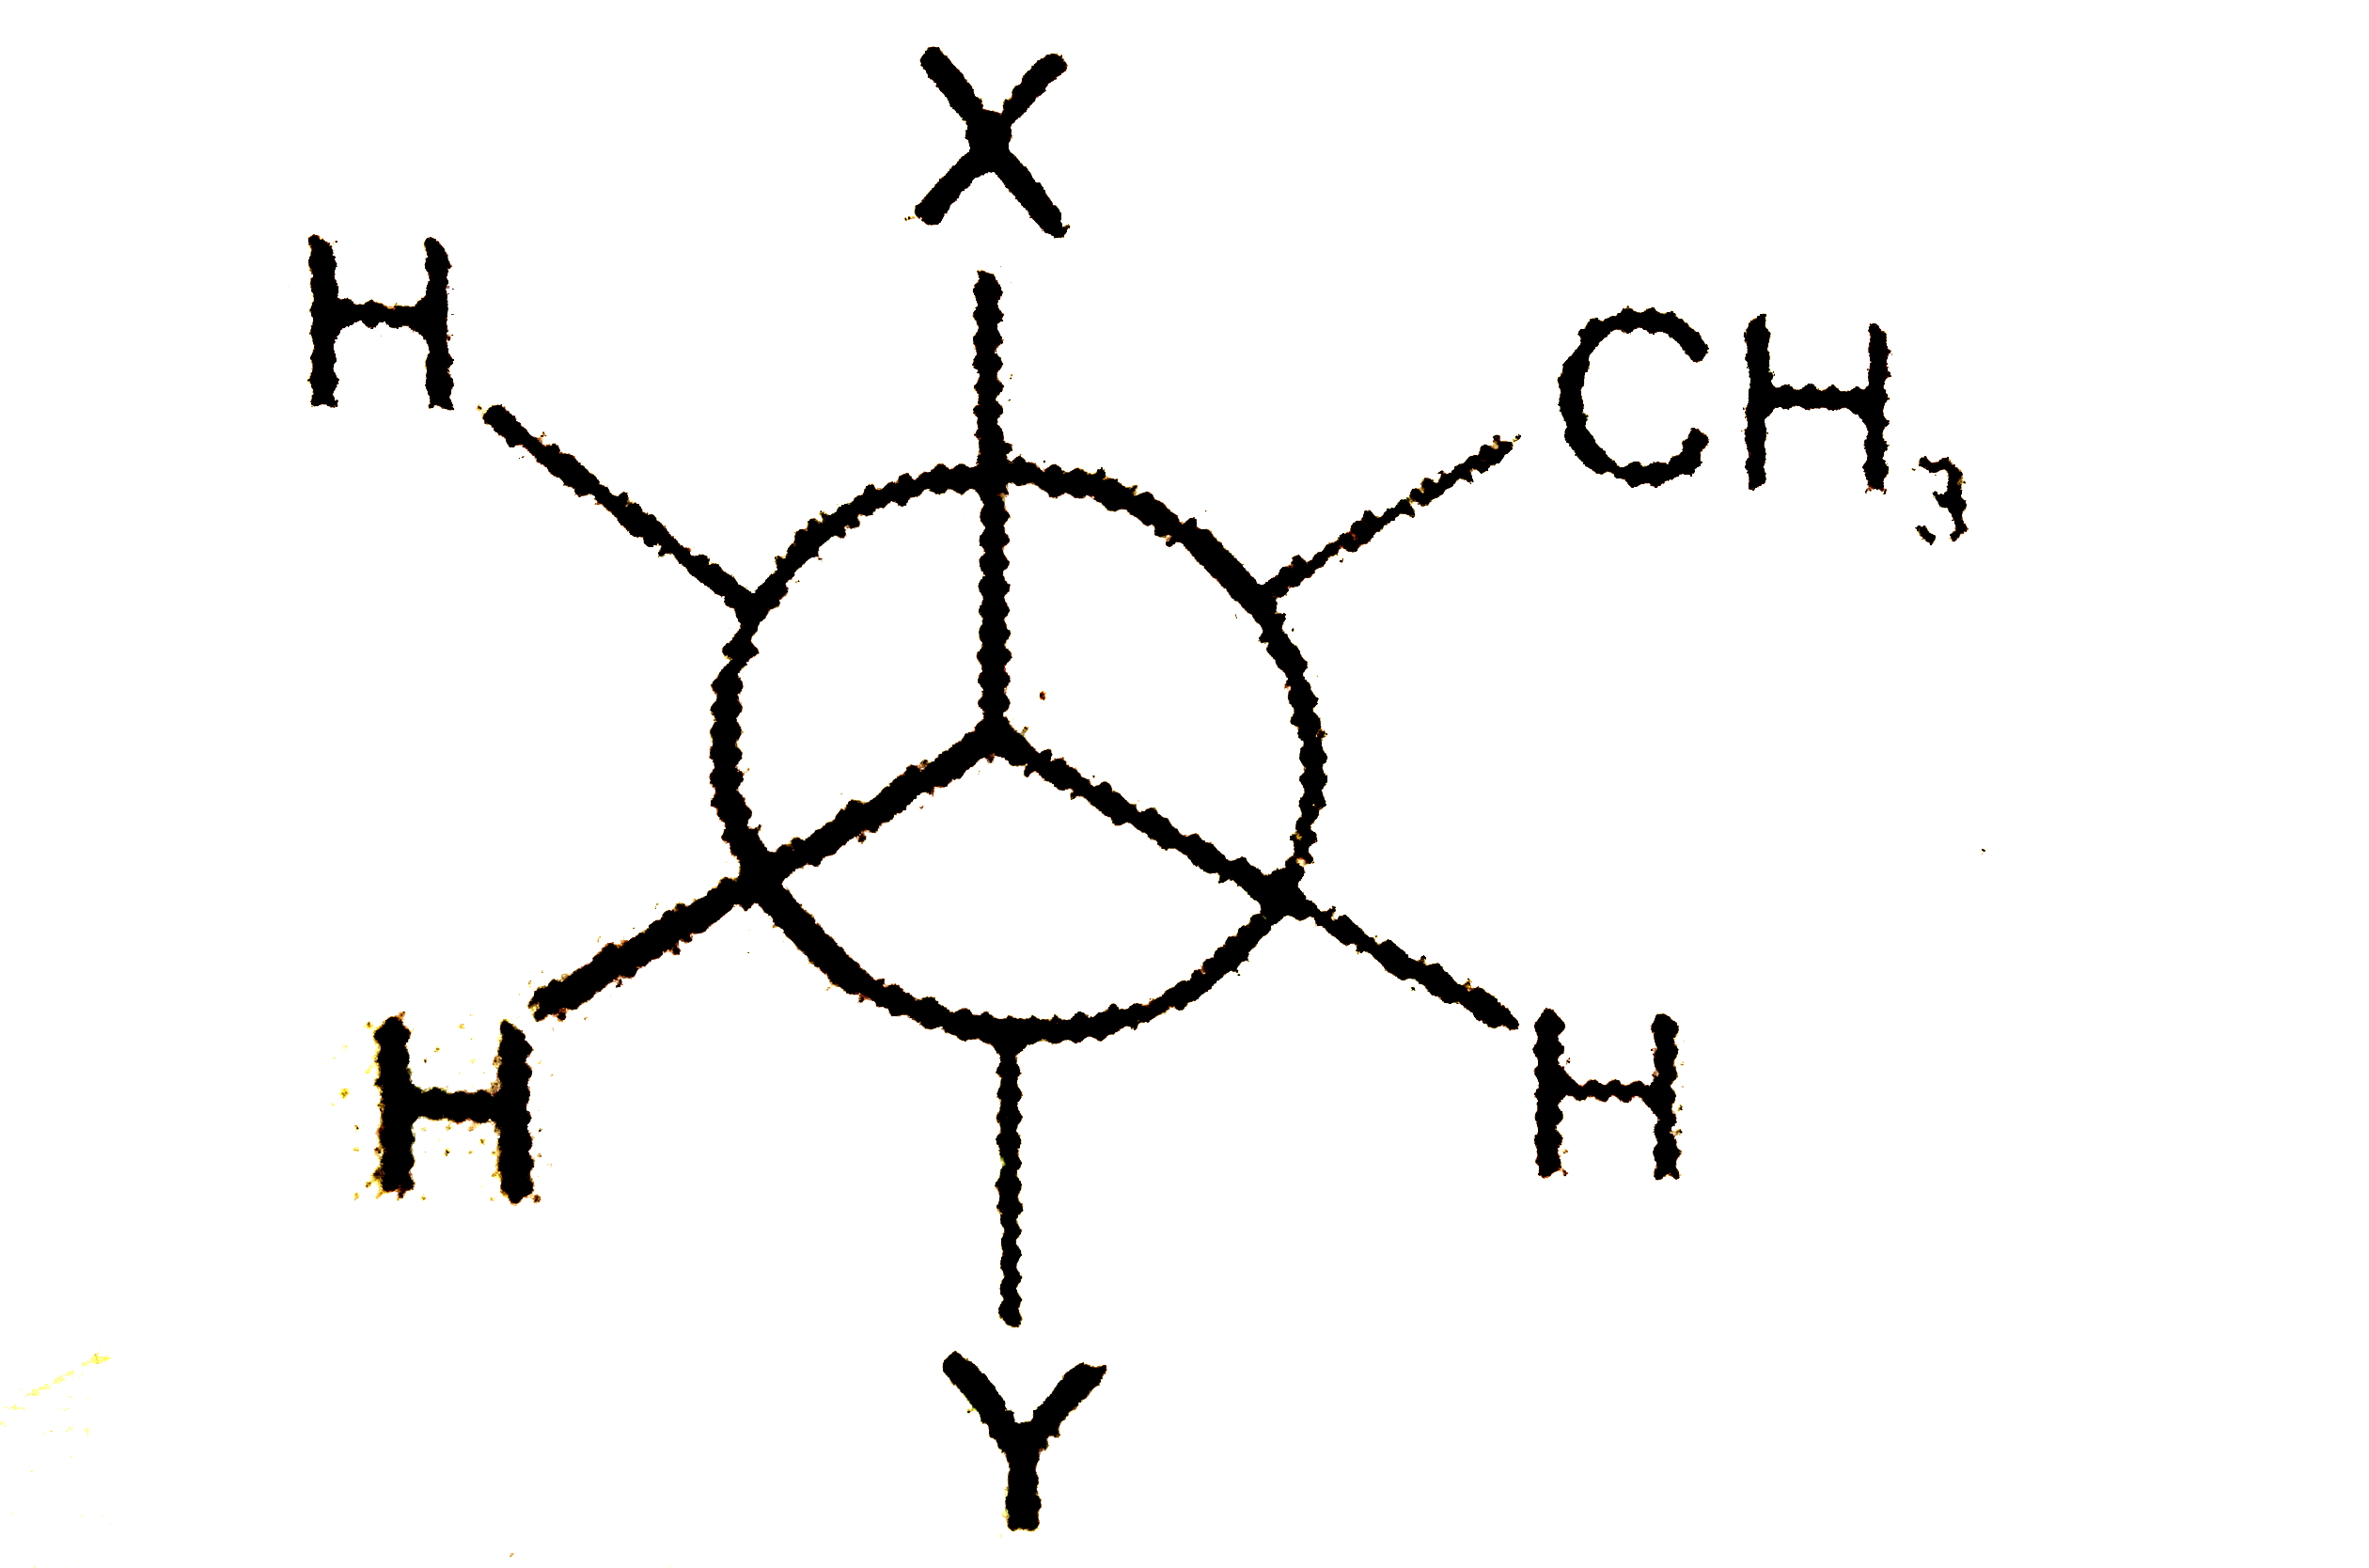 The newman projection formula of 23, dimethylbutane is given as